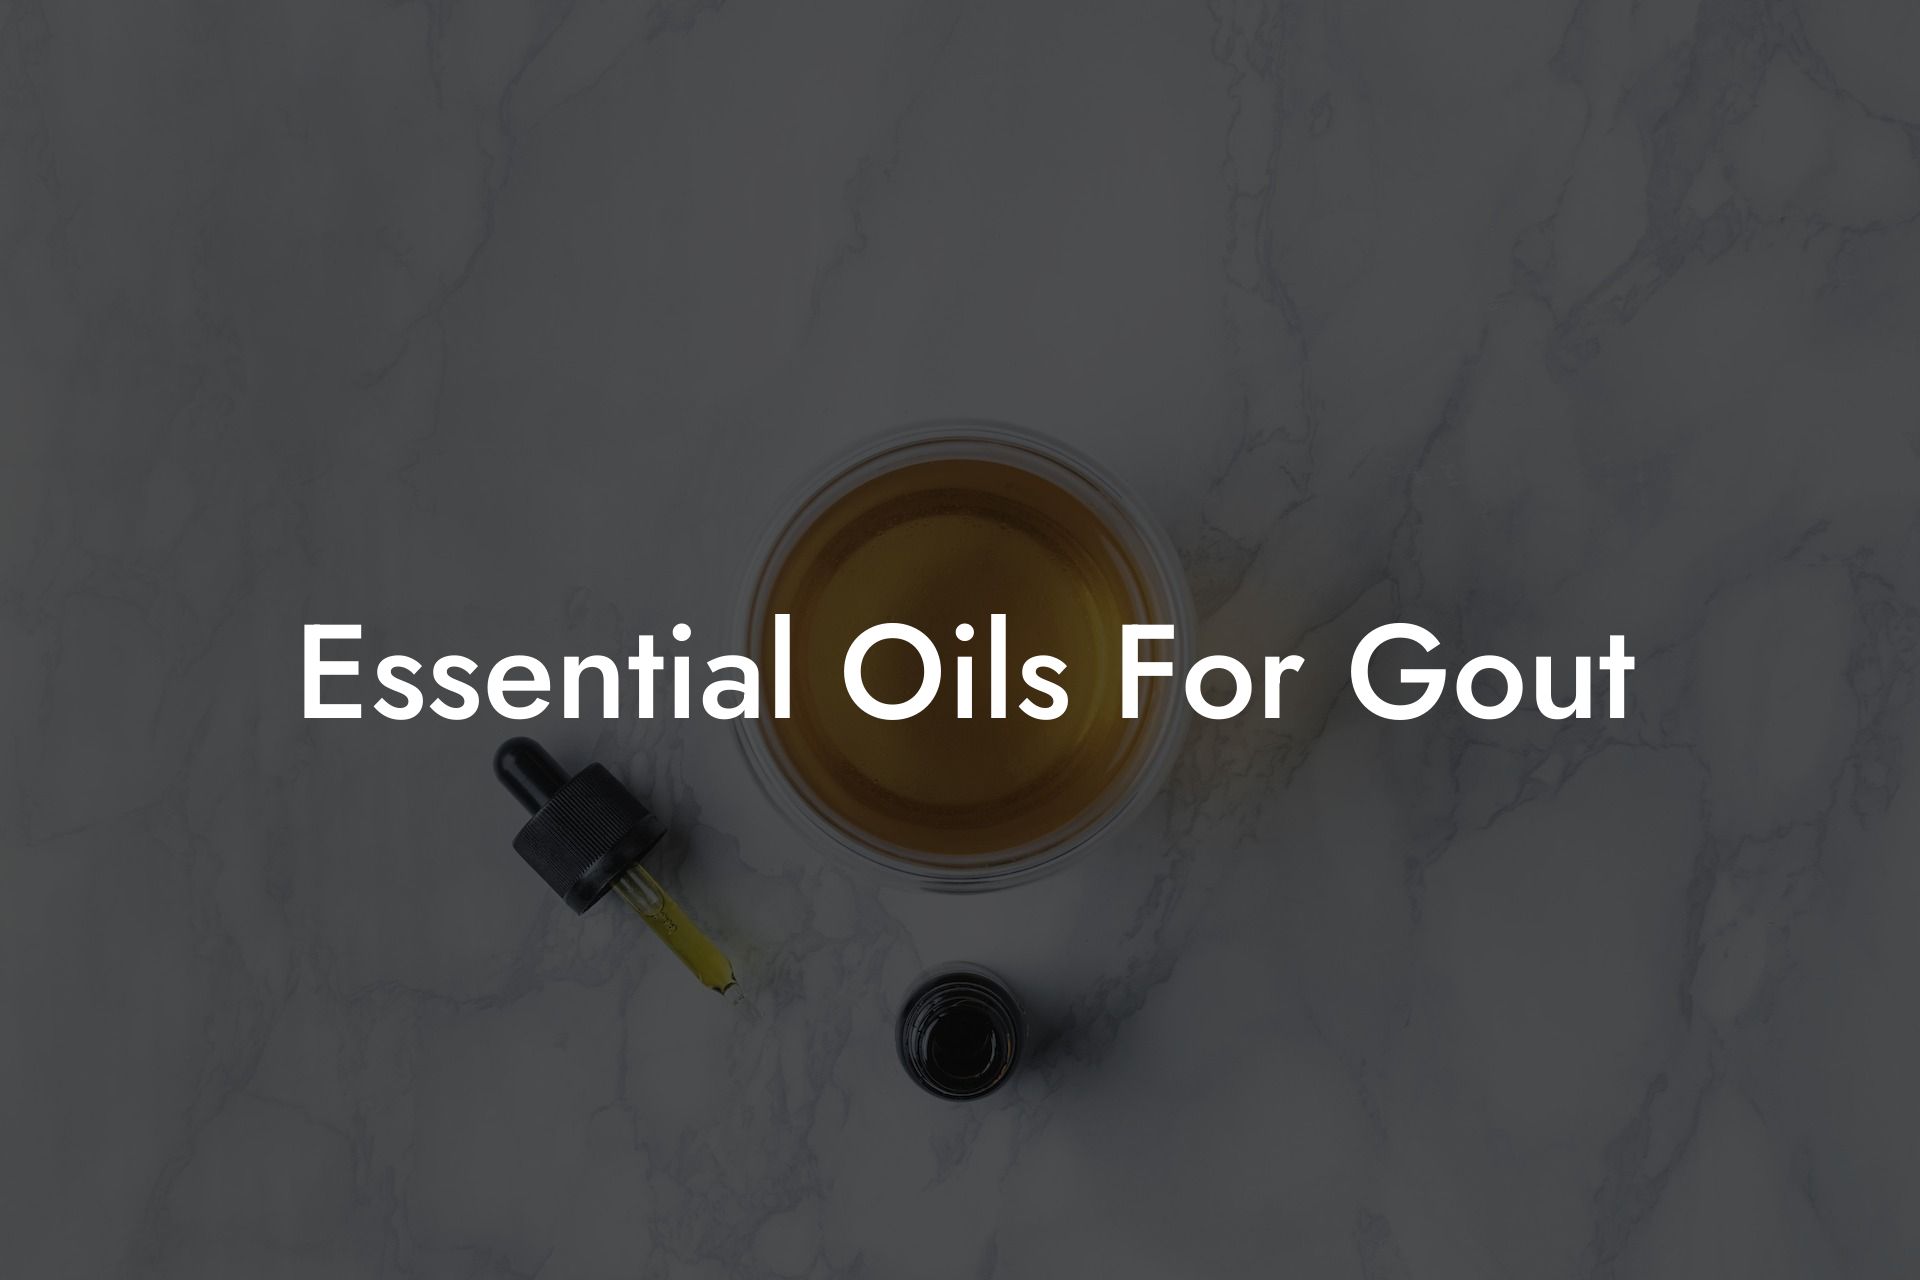 Essential Oils For Gout